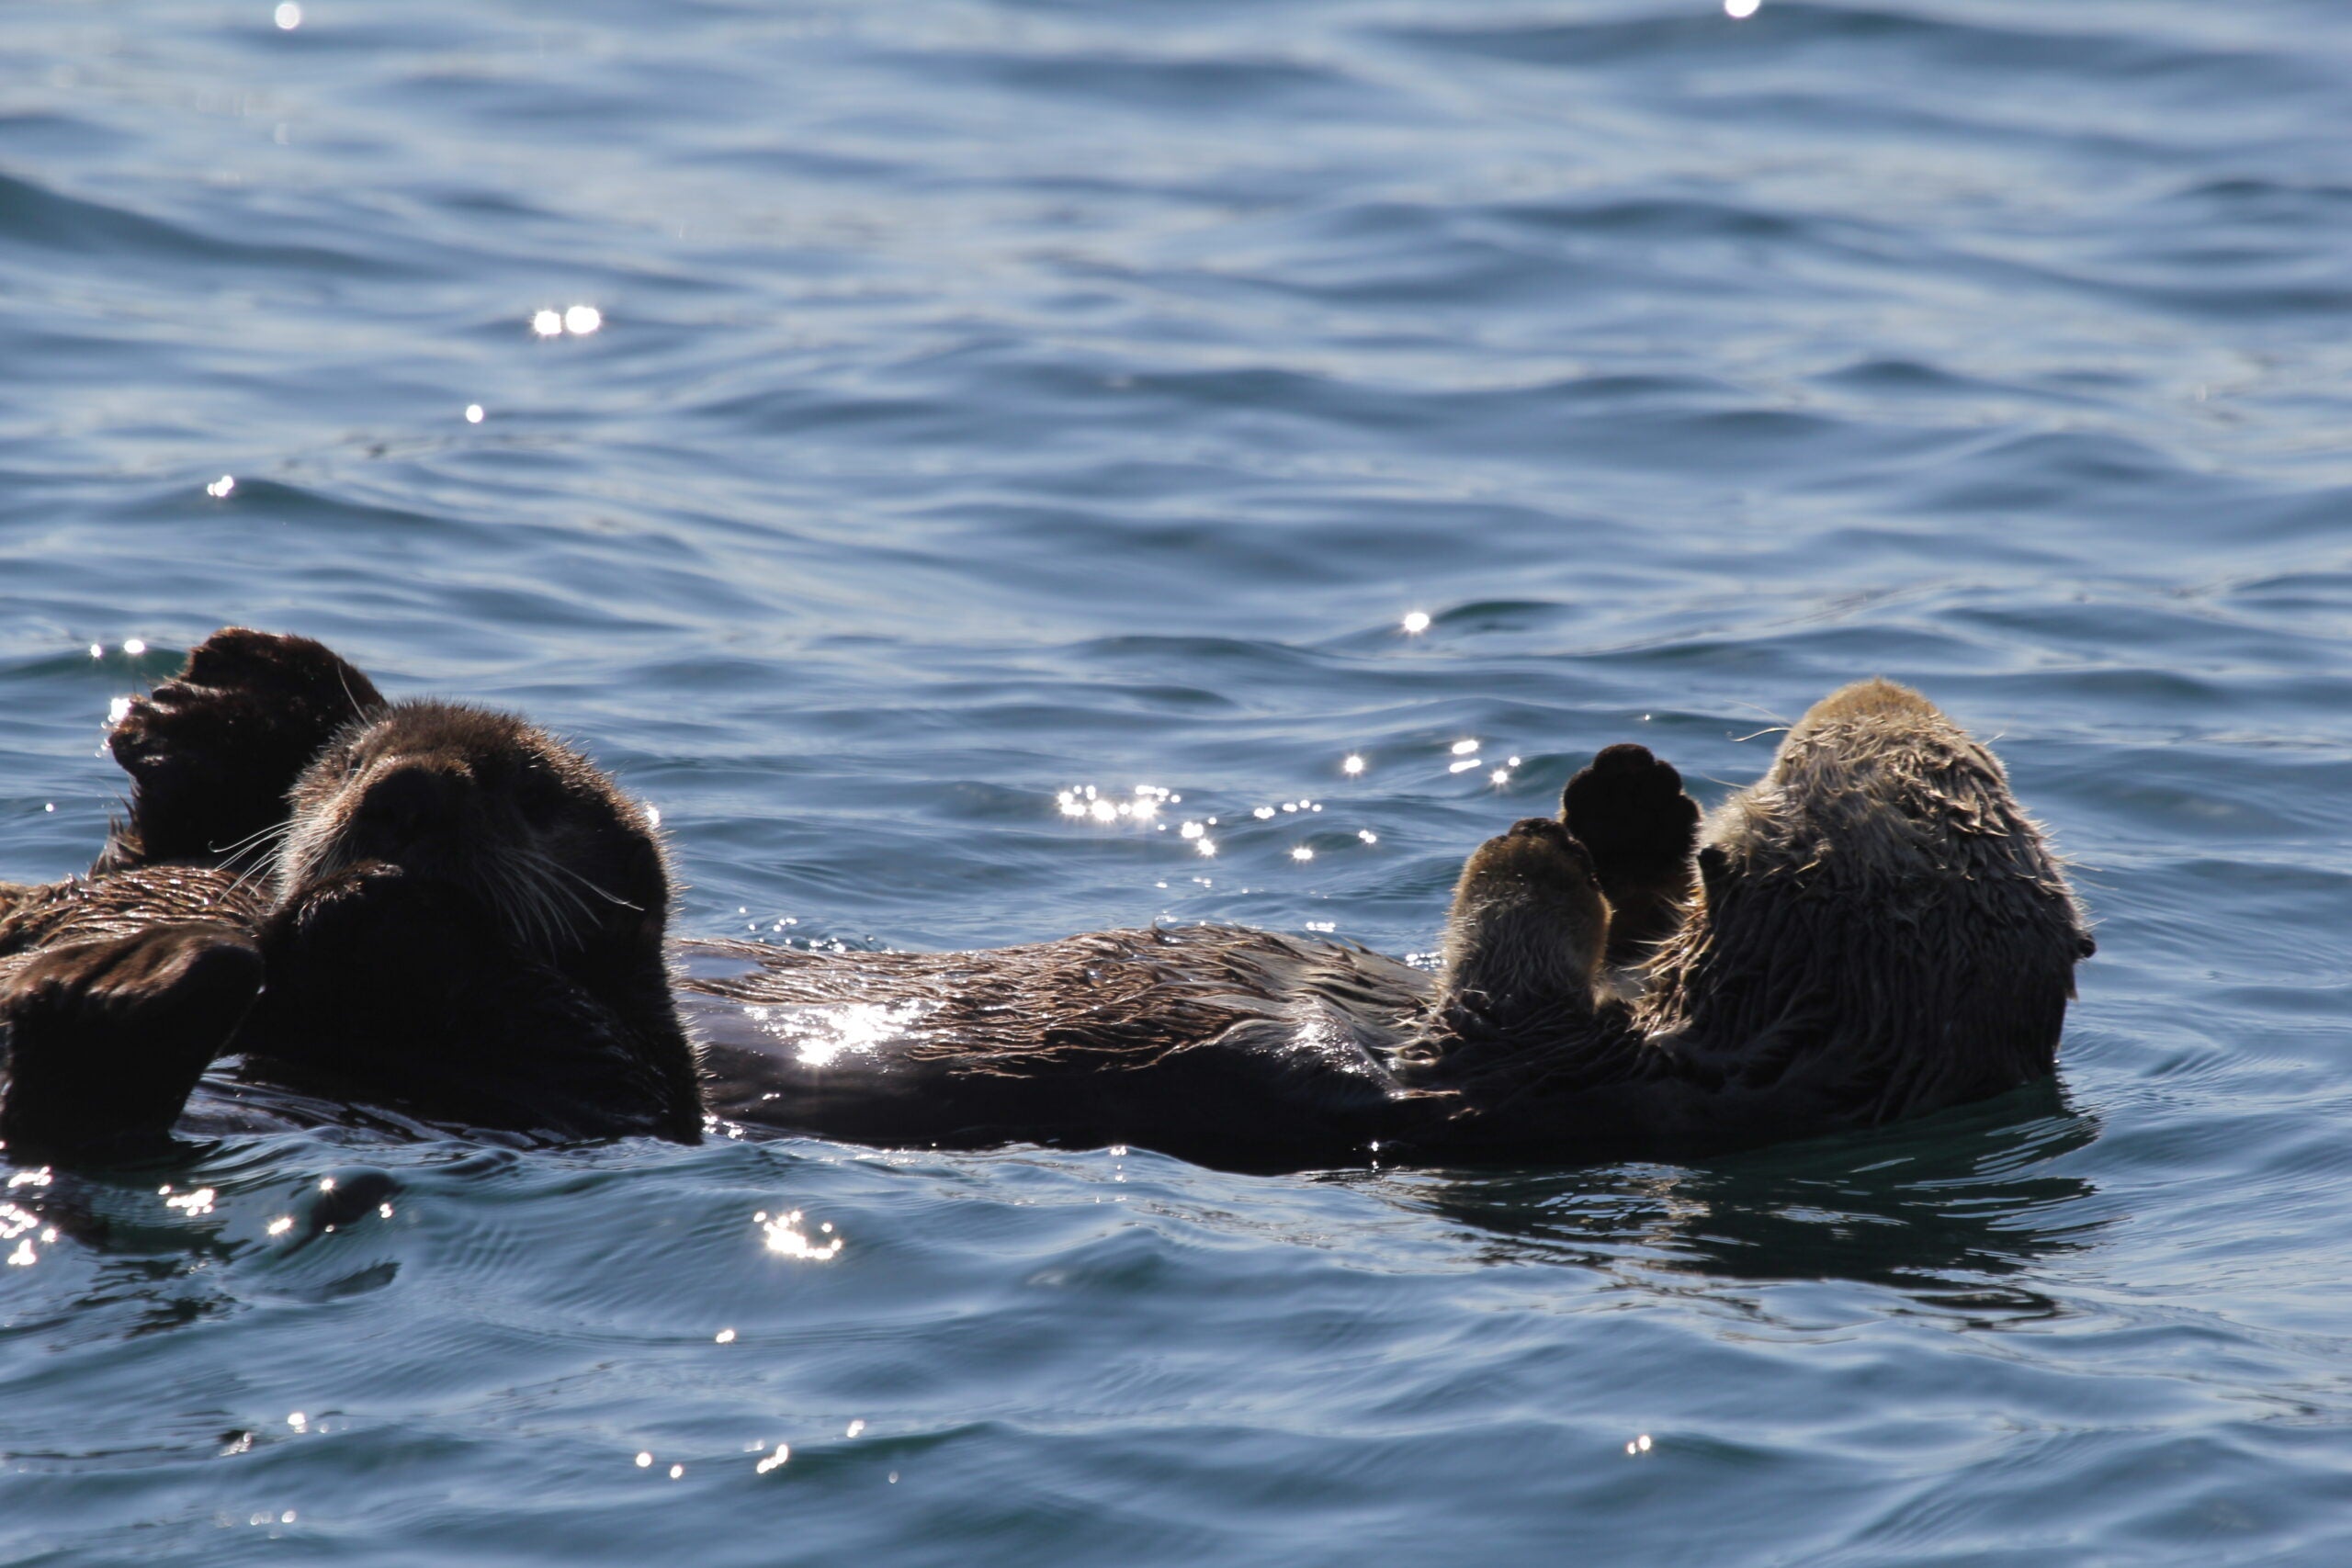 Sea Otters float on their backs in the waters of Alaska